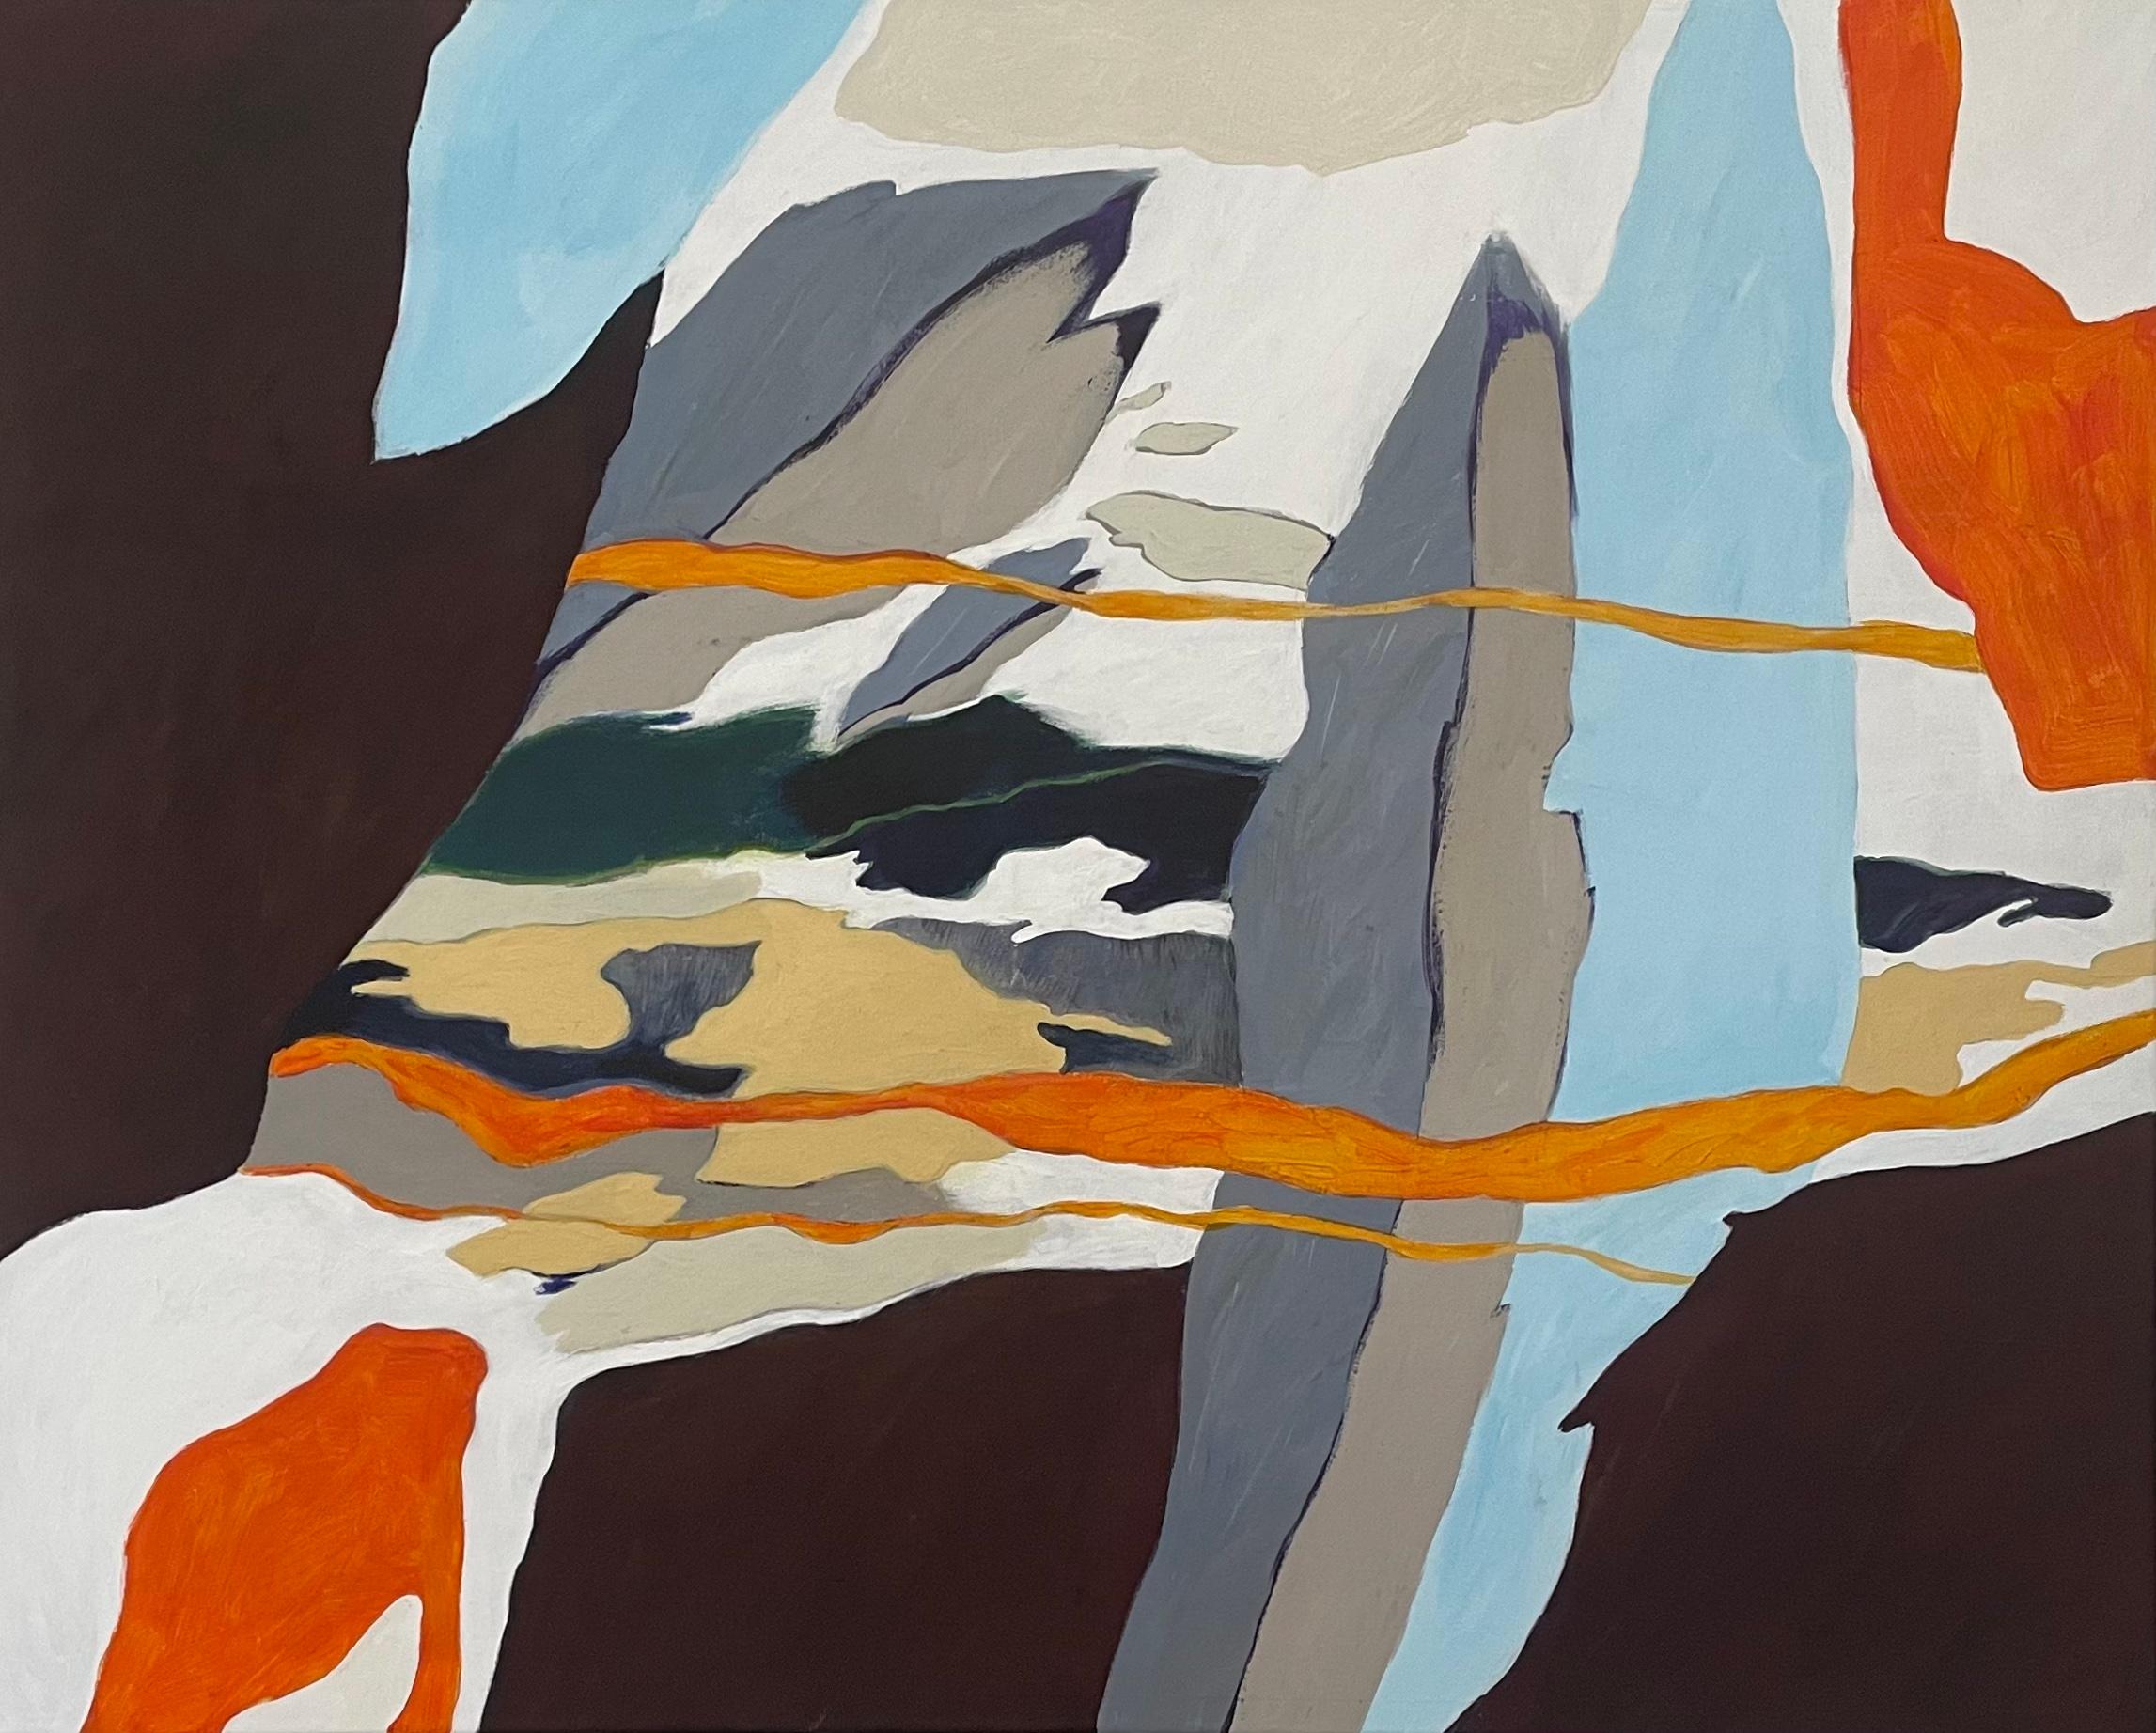 "Step Carefully" is a contemporary abstract painting that invites you to experience a vivid and dynamic creation, where movement and calm coexist. Its vibrant palette, featuring bright orange, gray, light blue, and small areas of light yellow,